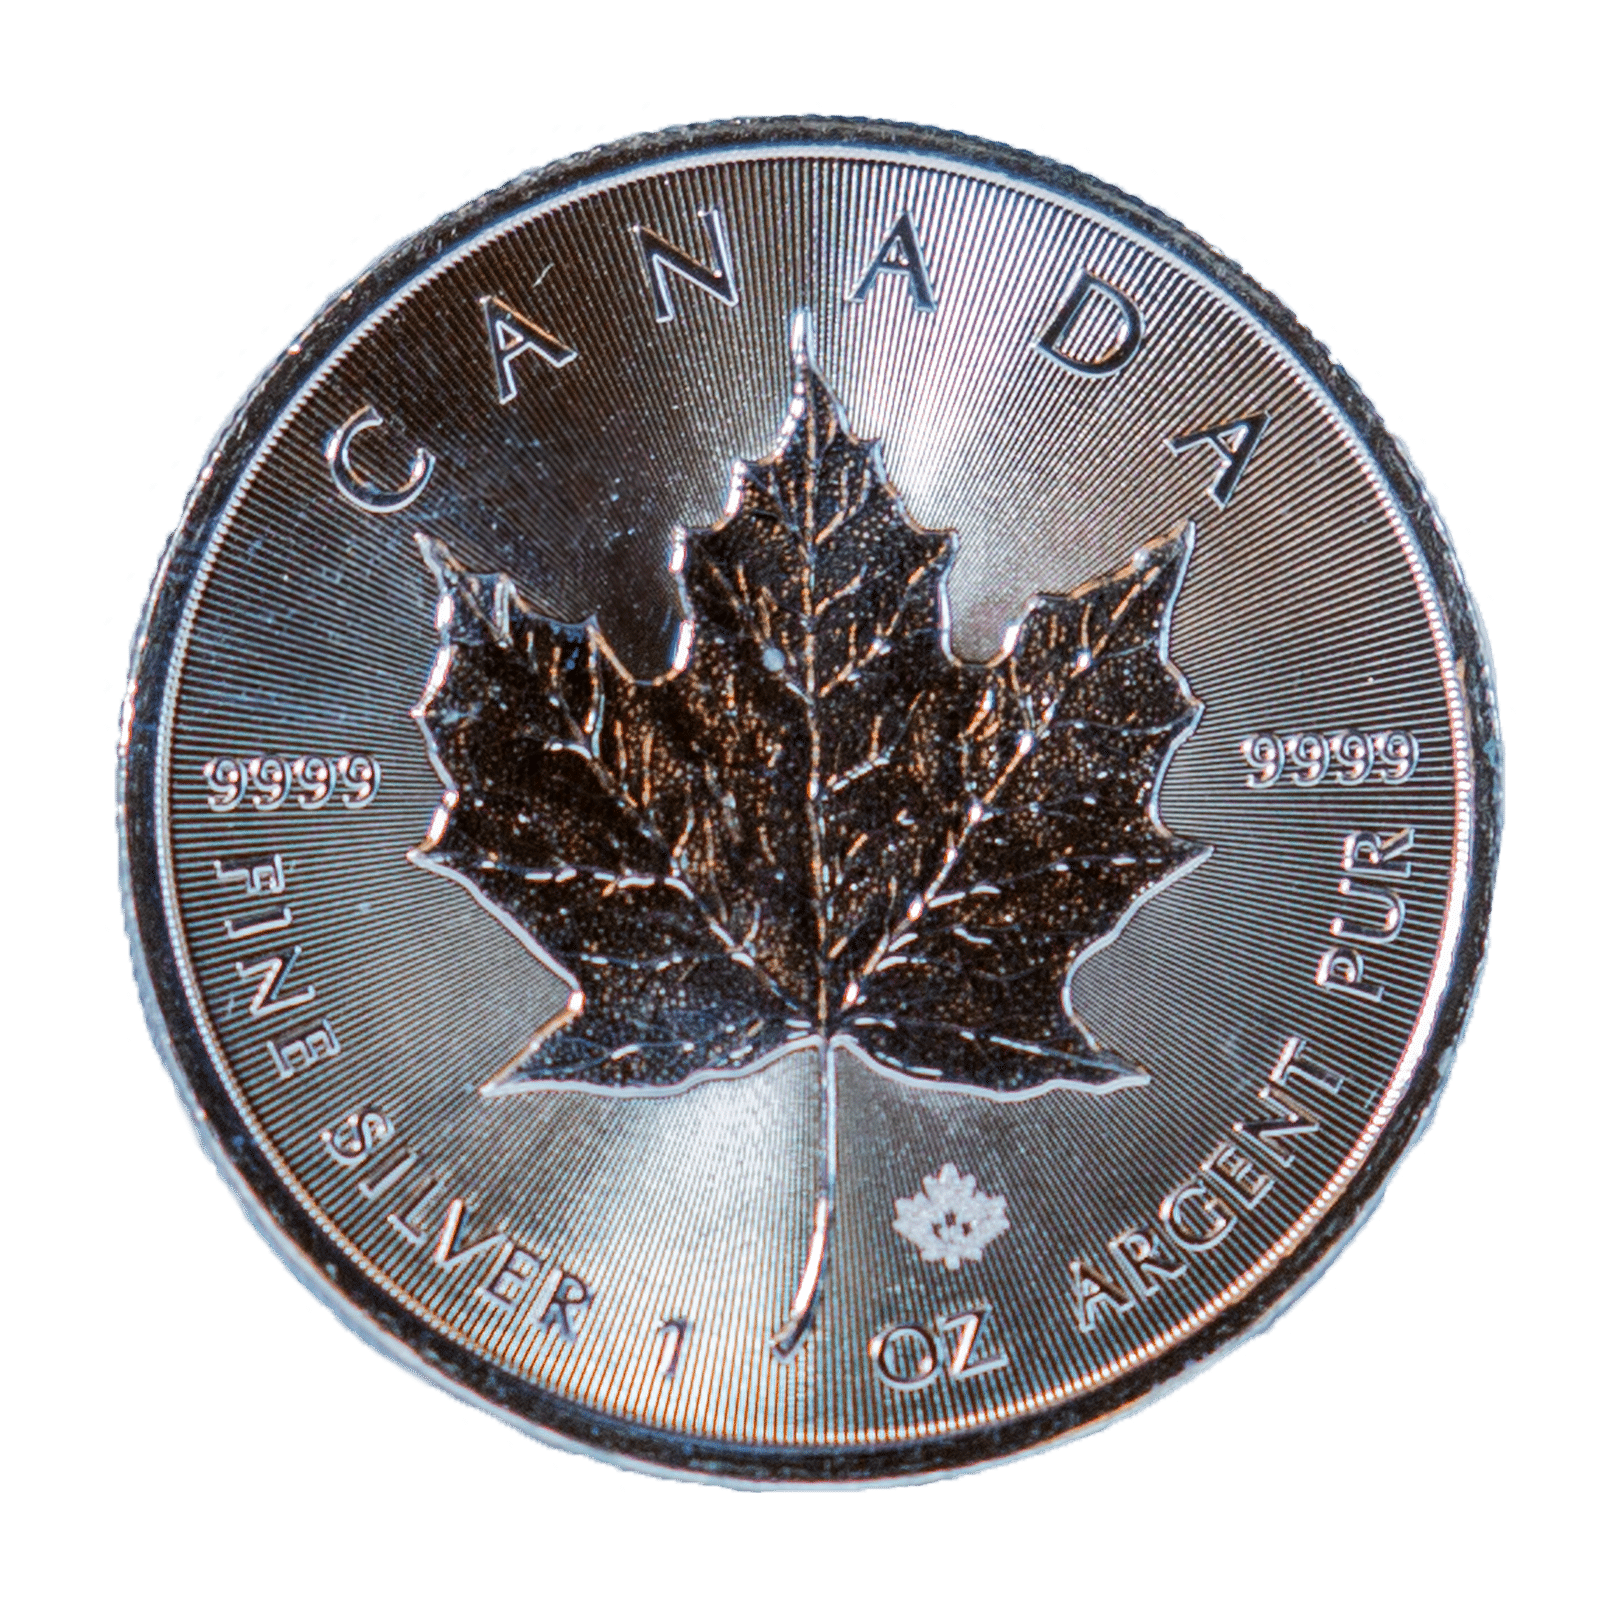 1-ounce Silver Maple Leaf coin, gleaming against a dark background.